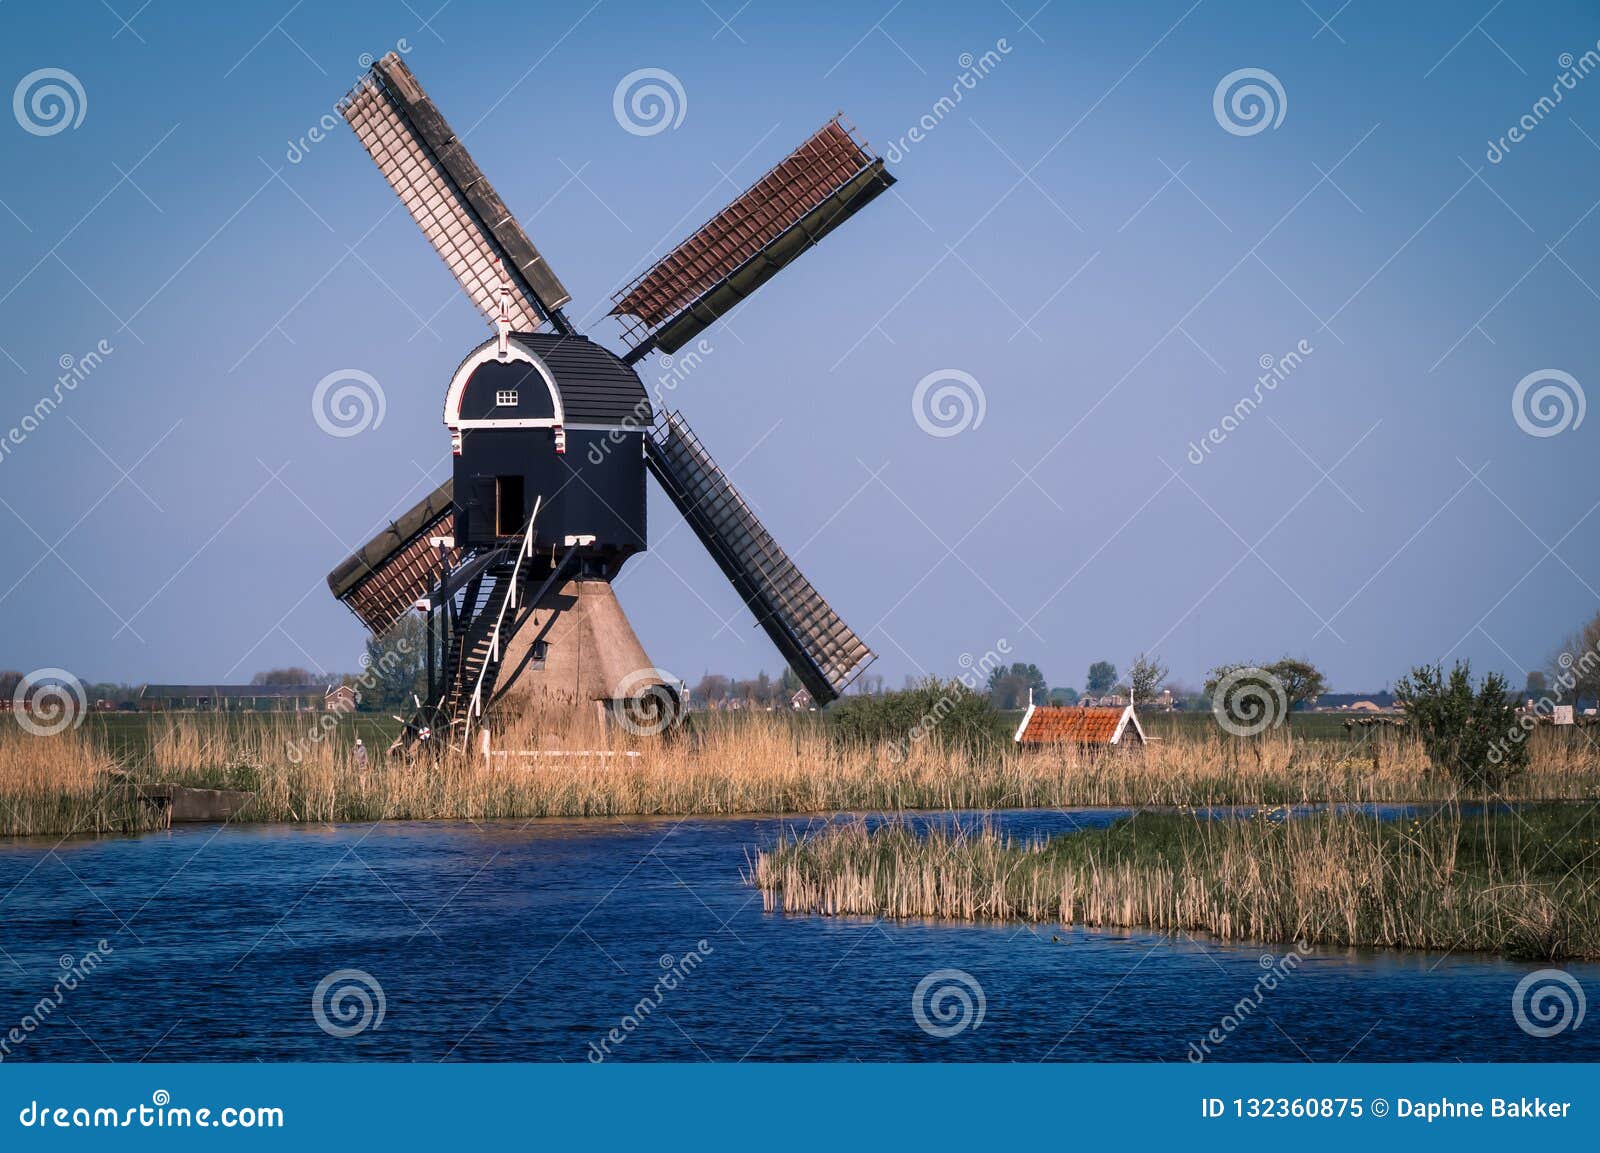 Dutch Polder Landscape with Traditional Windmill Stock Image - Image of ...